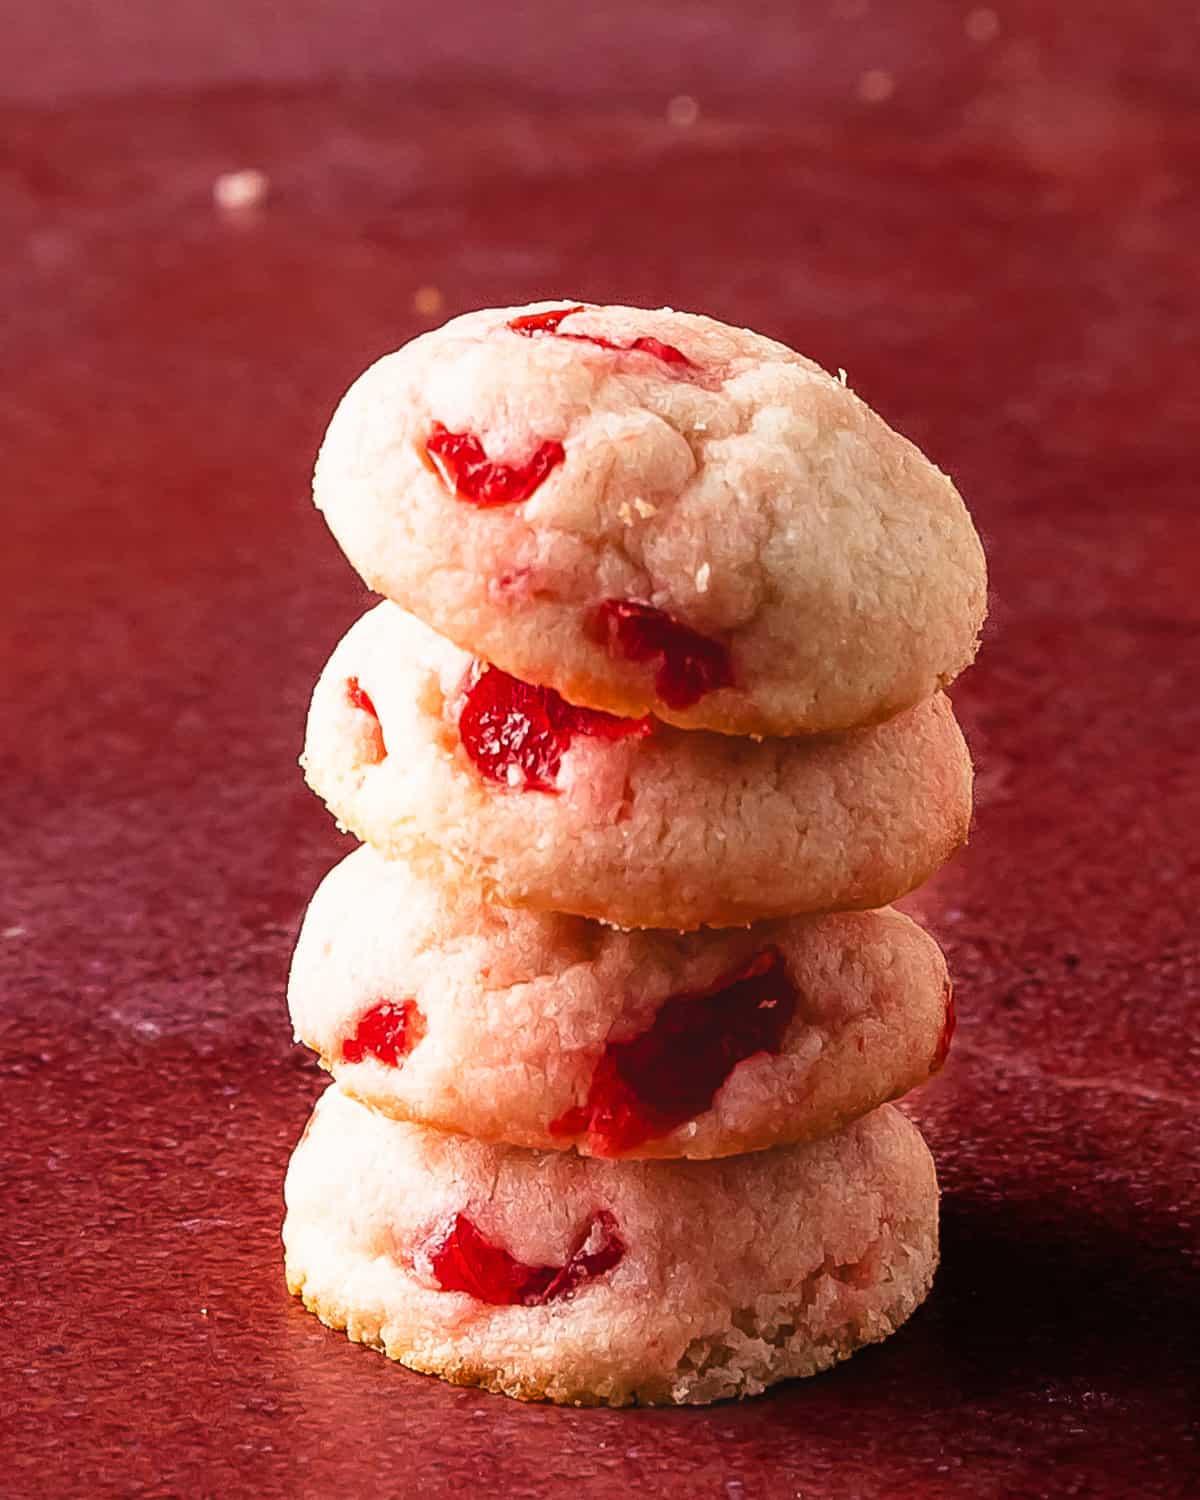 Cherry cookies are soft and buttery shortbread style drop cookies filled with maraschino cherries and sweet almond flavor. These pretty pink maraschino cherry cookies are the perfect quick and easy cherry sugar cookie recipe for any occasion. 